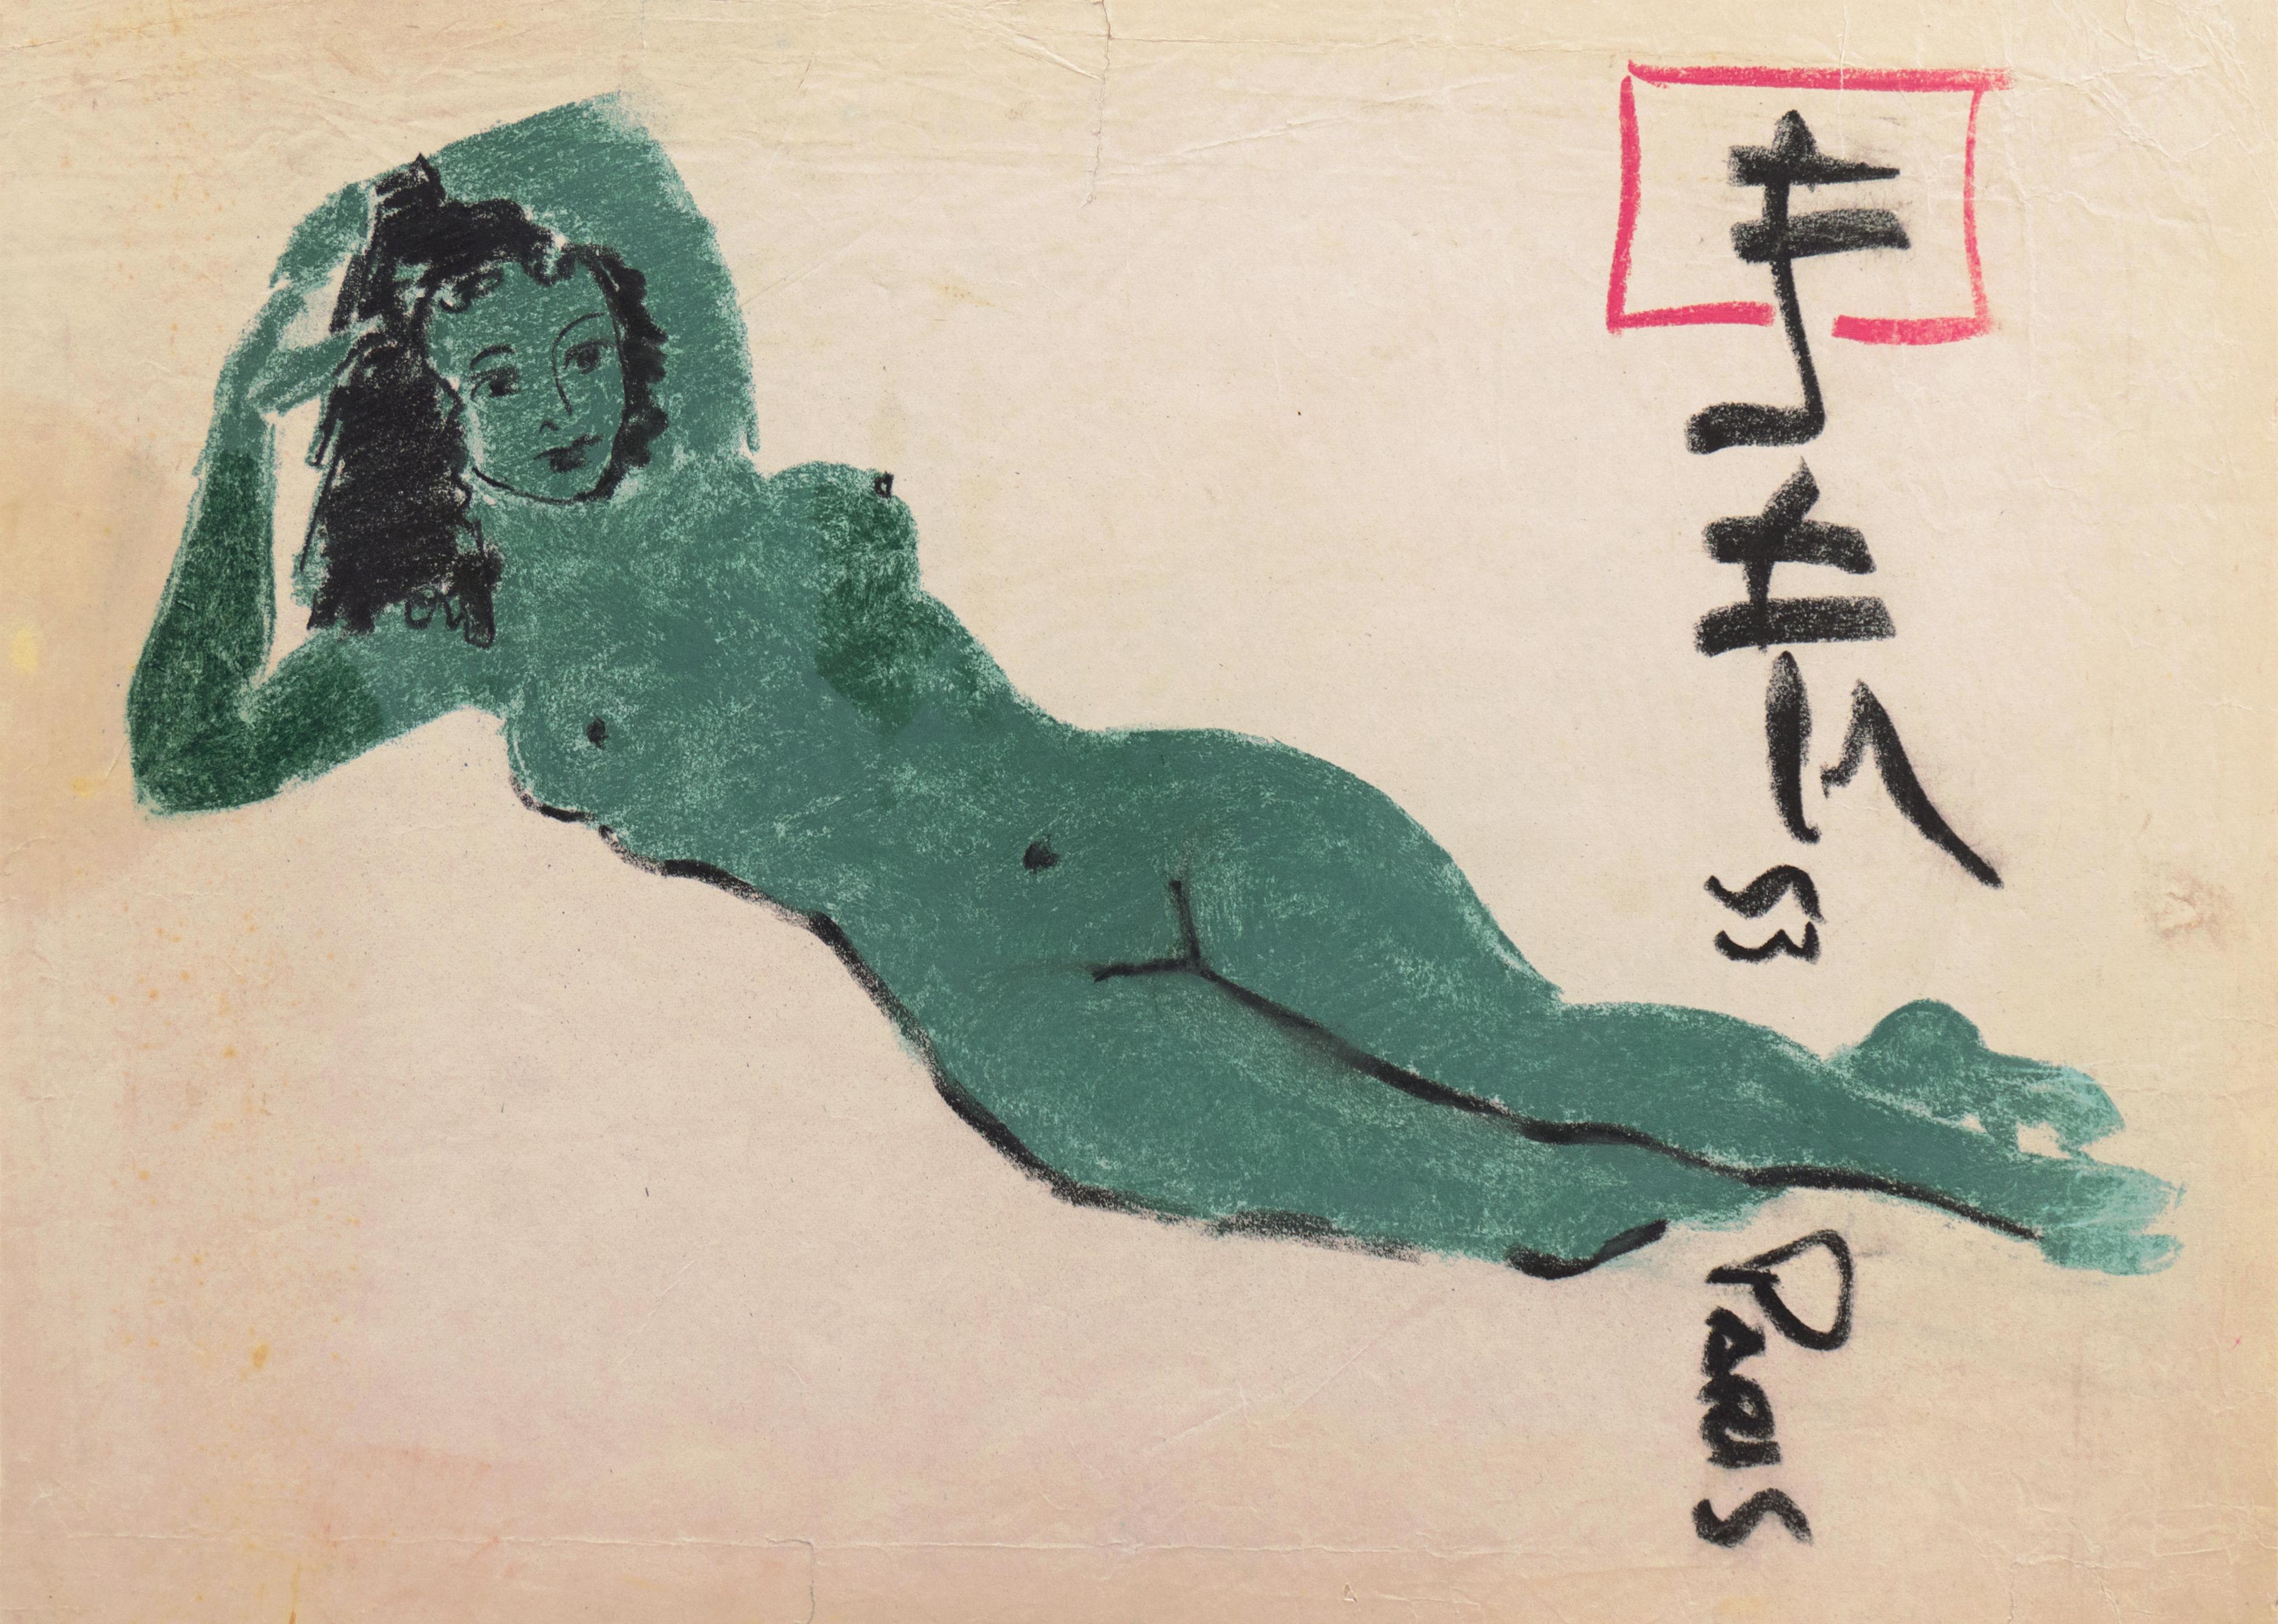 'Reclining Nude in Jade', Mid-century Figural, Paris - Art by French School, 20th century